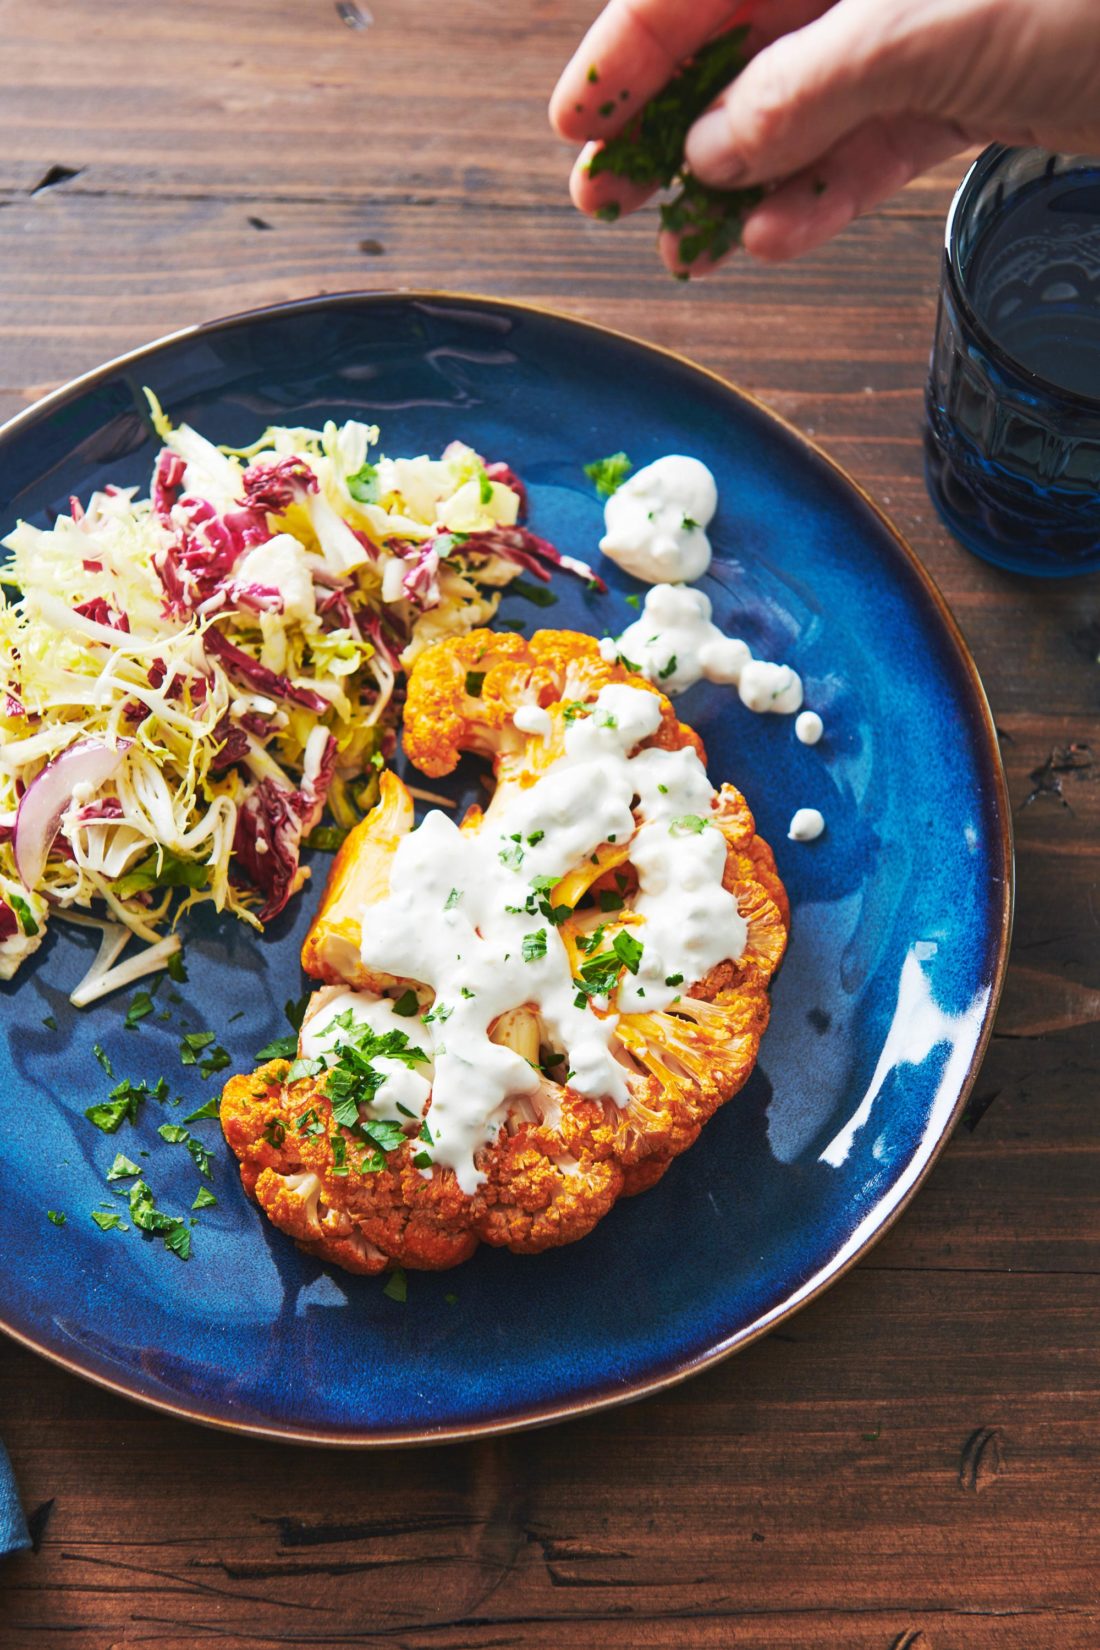 Roasted Buffalo Cauliflower Steak topped with Bleu Cheese dip on a plate with salad.